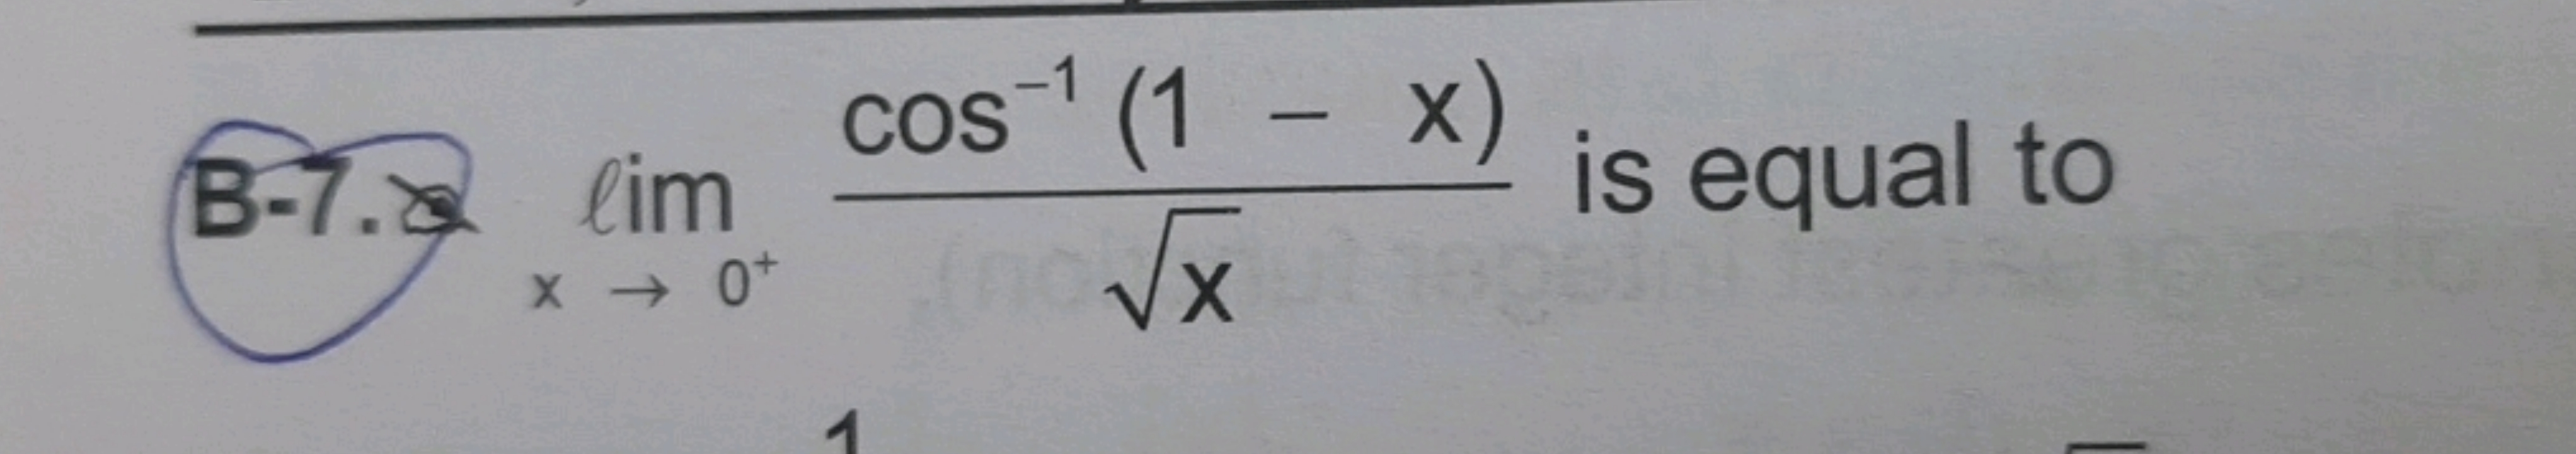 B-7.2 limx→0+​x​cos−1(1−x)​ is equal to
